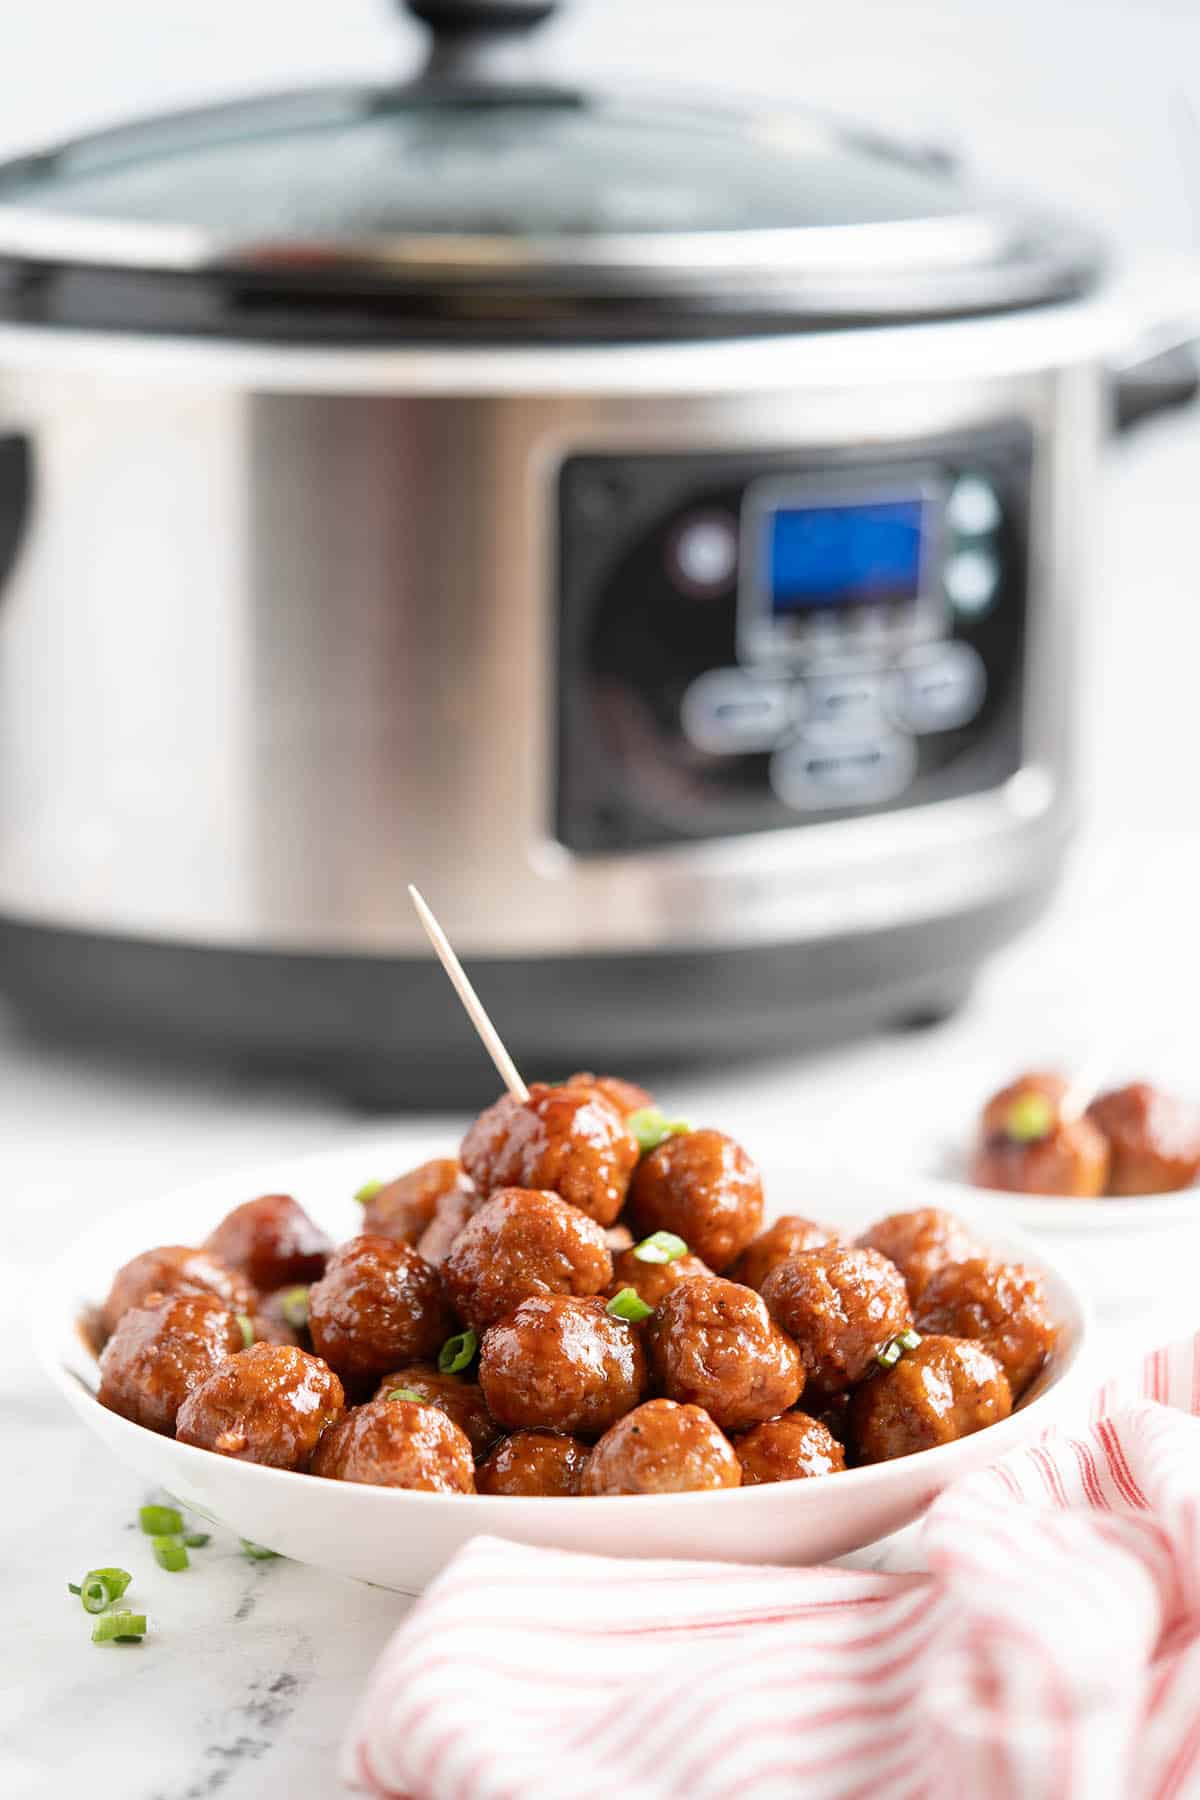 A platter filled with Hidden Valley Grape Jelly Barbecue Meatballs in front of a slow cooker.